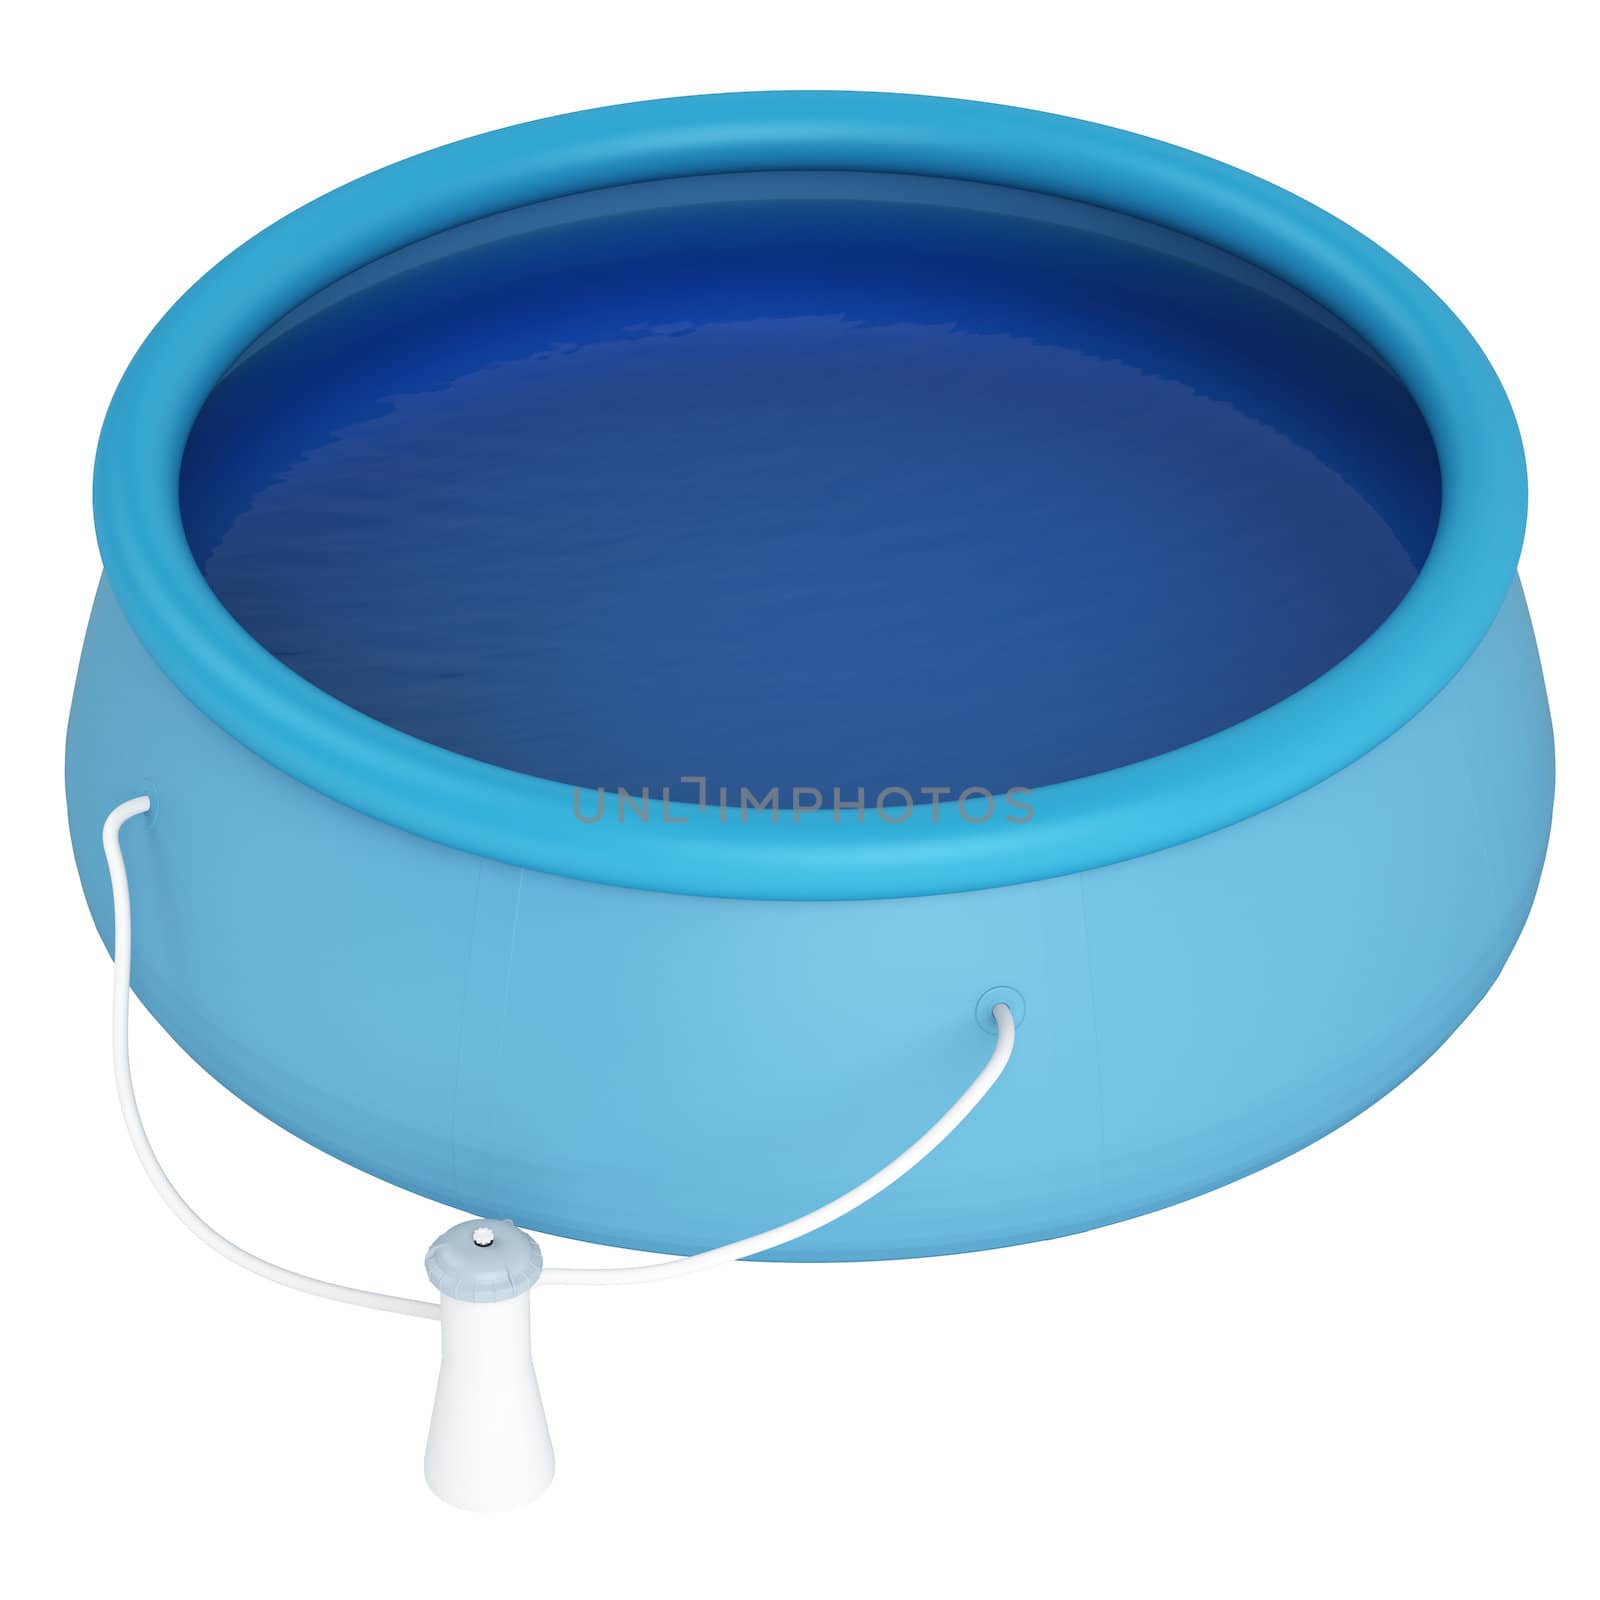 Childs blue plastic swimming pool filled with water and with an attached filter isolated on white